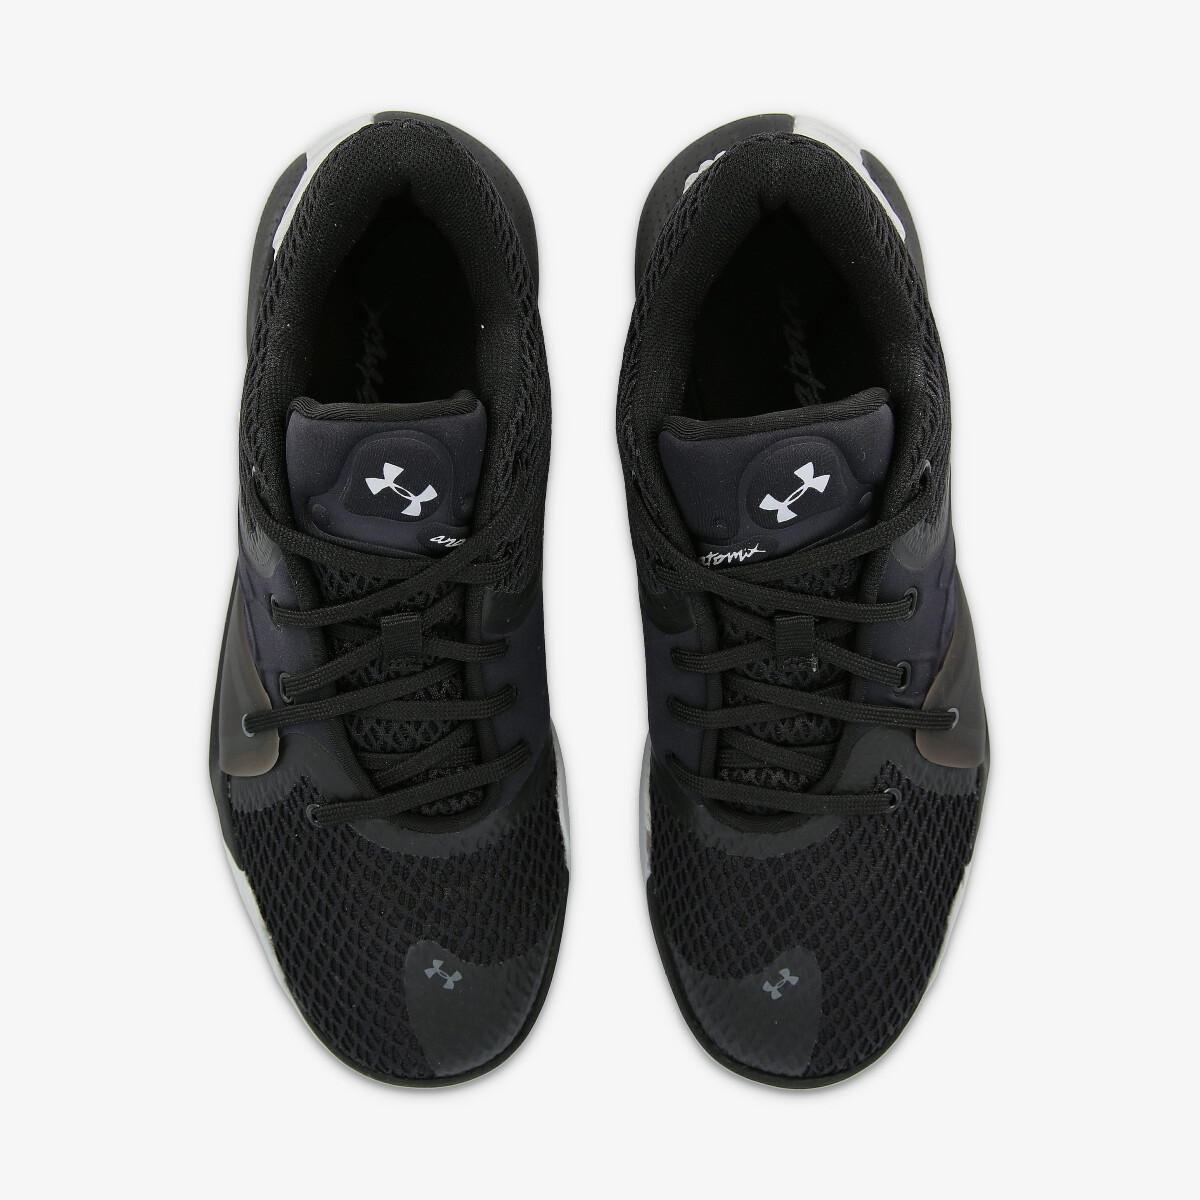 Under Armour Adult UA Spawn 2 Basketball Shoes 